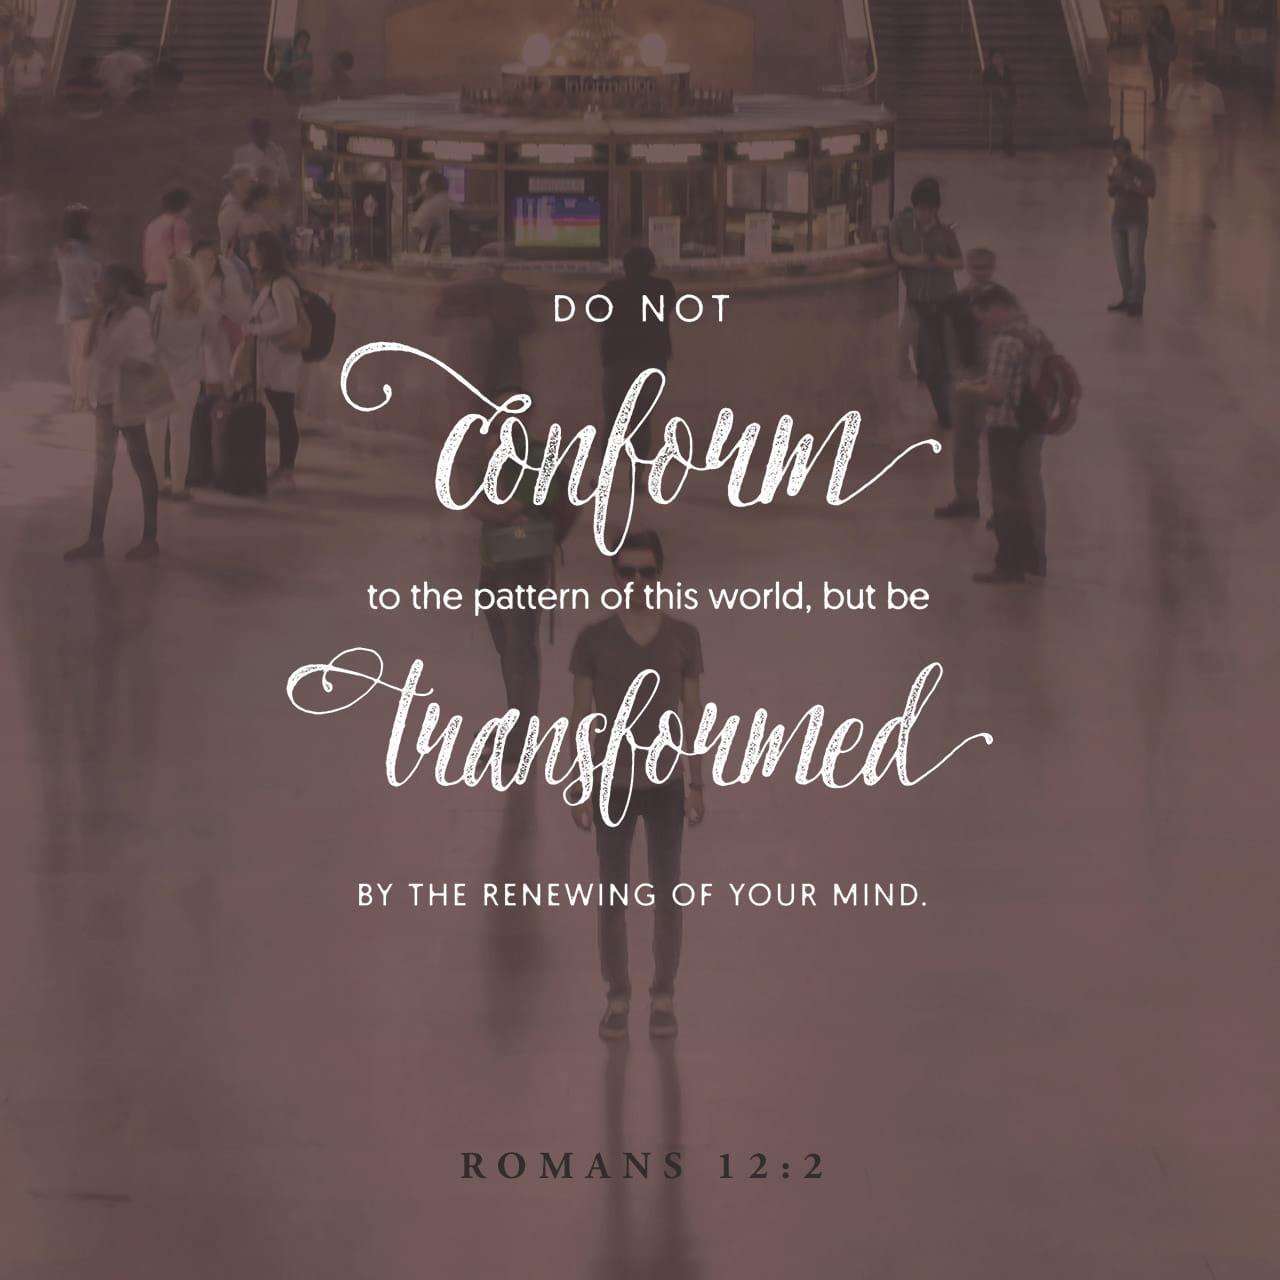 Bible Verse of the Day - day 84 - image 526 (Romans 12:1-2)